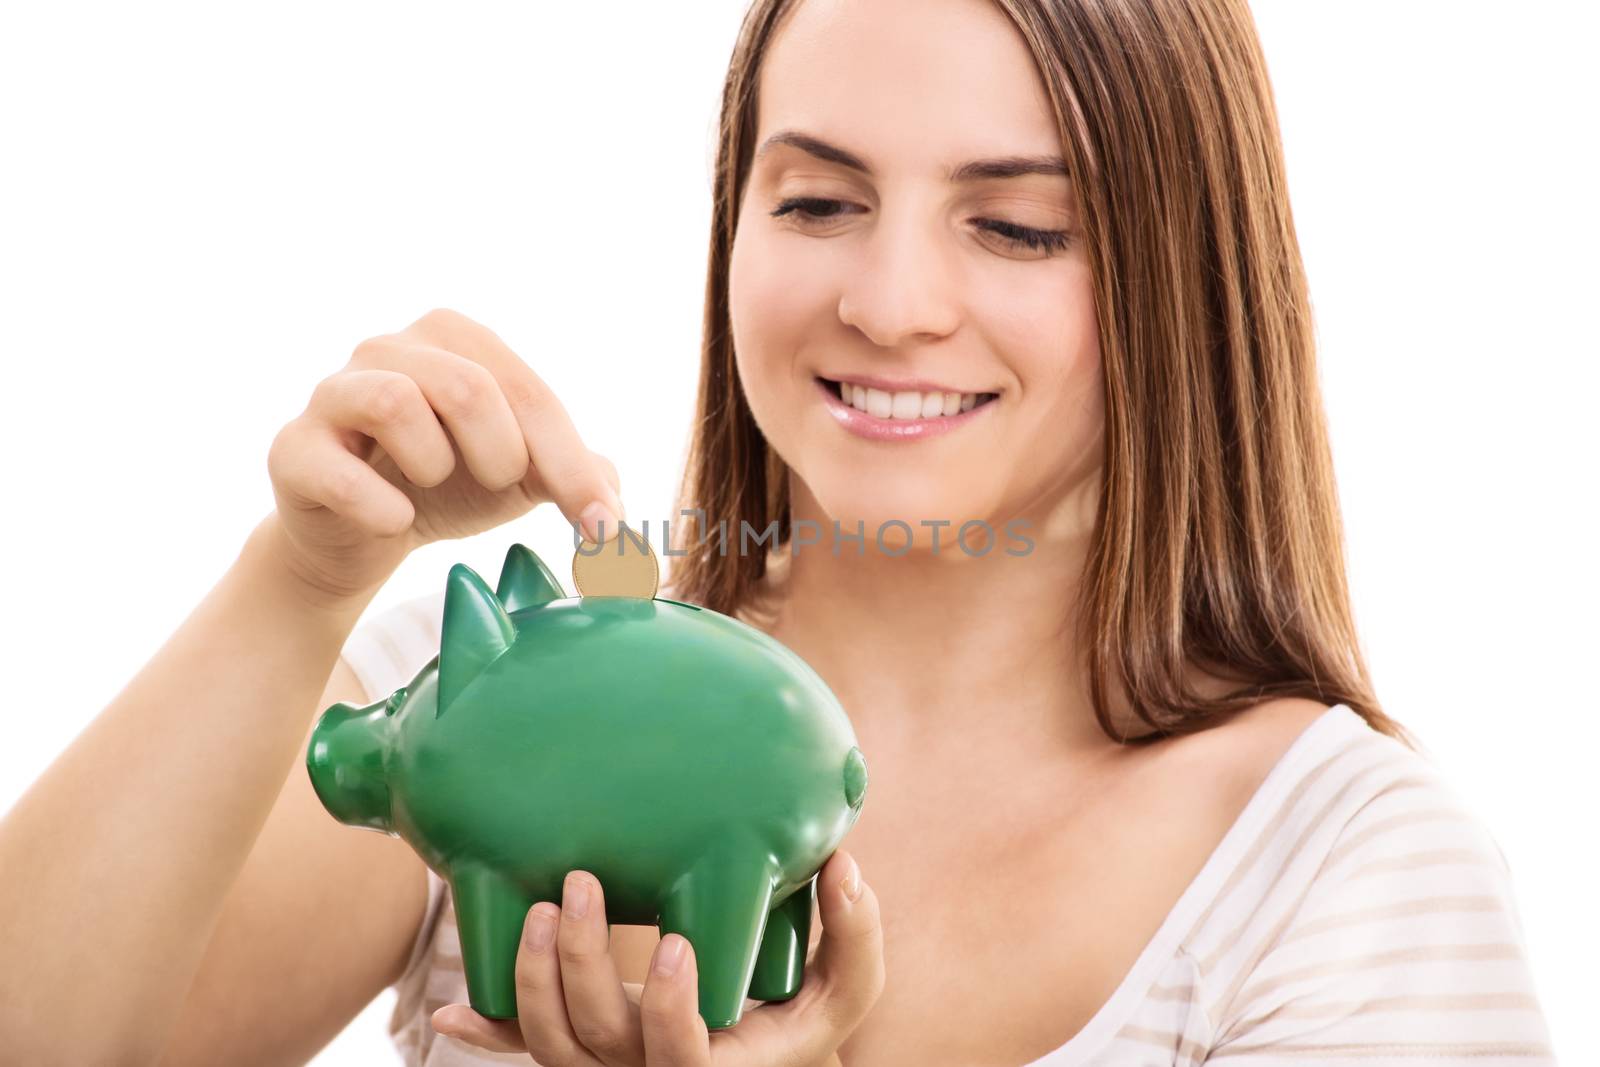 Young girl putting money in a piggy bank, isolated on white background.